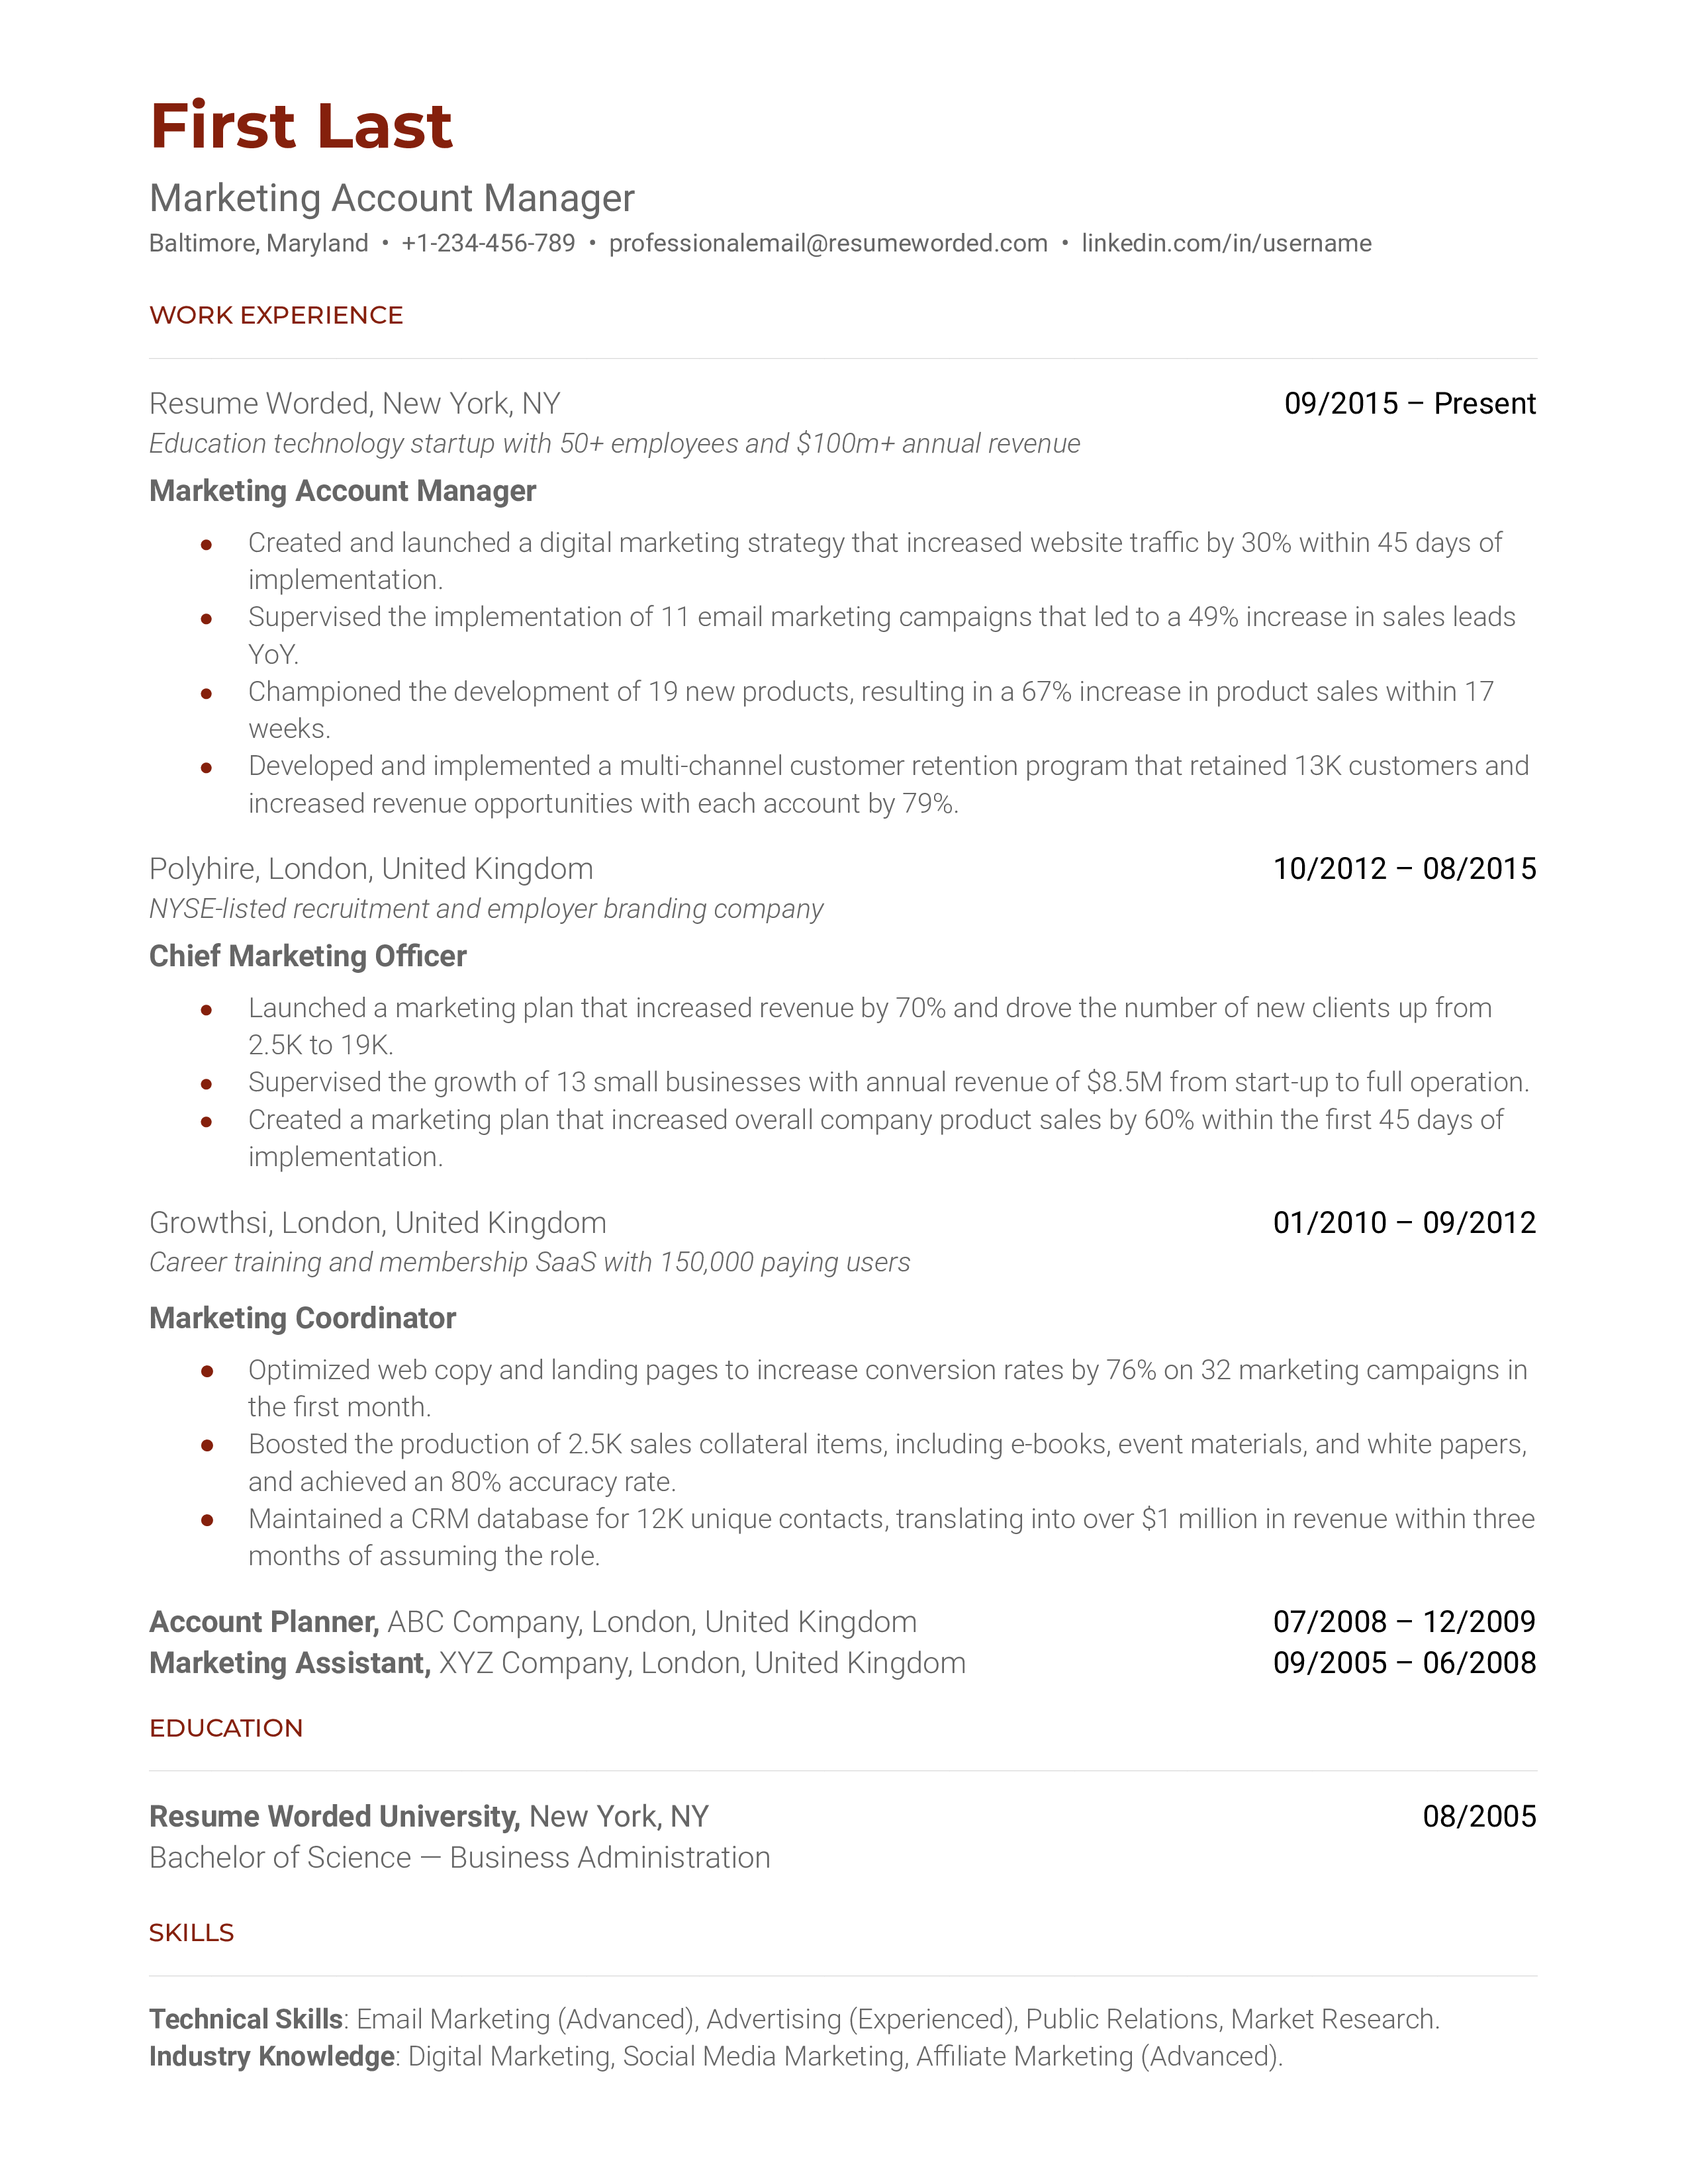 A marketing account manager resume sample that highlights the applicant’s wide range of marketing experience in multiple industries.